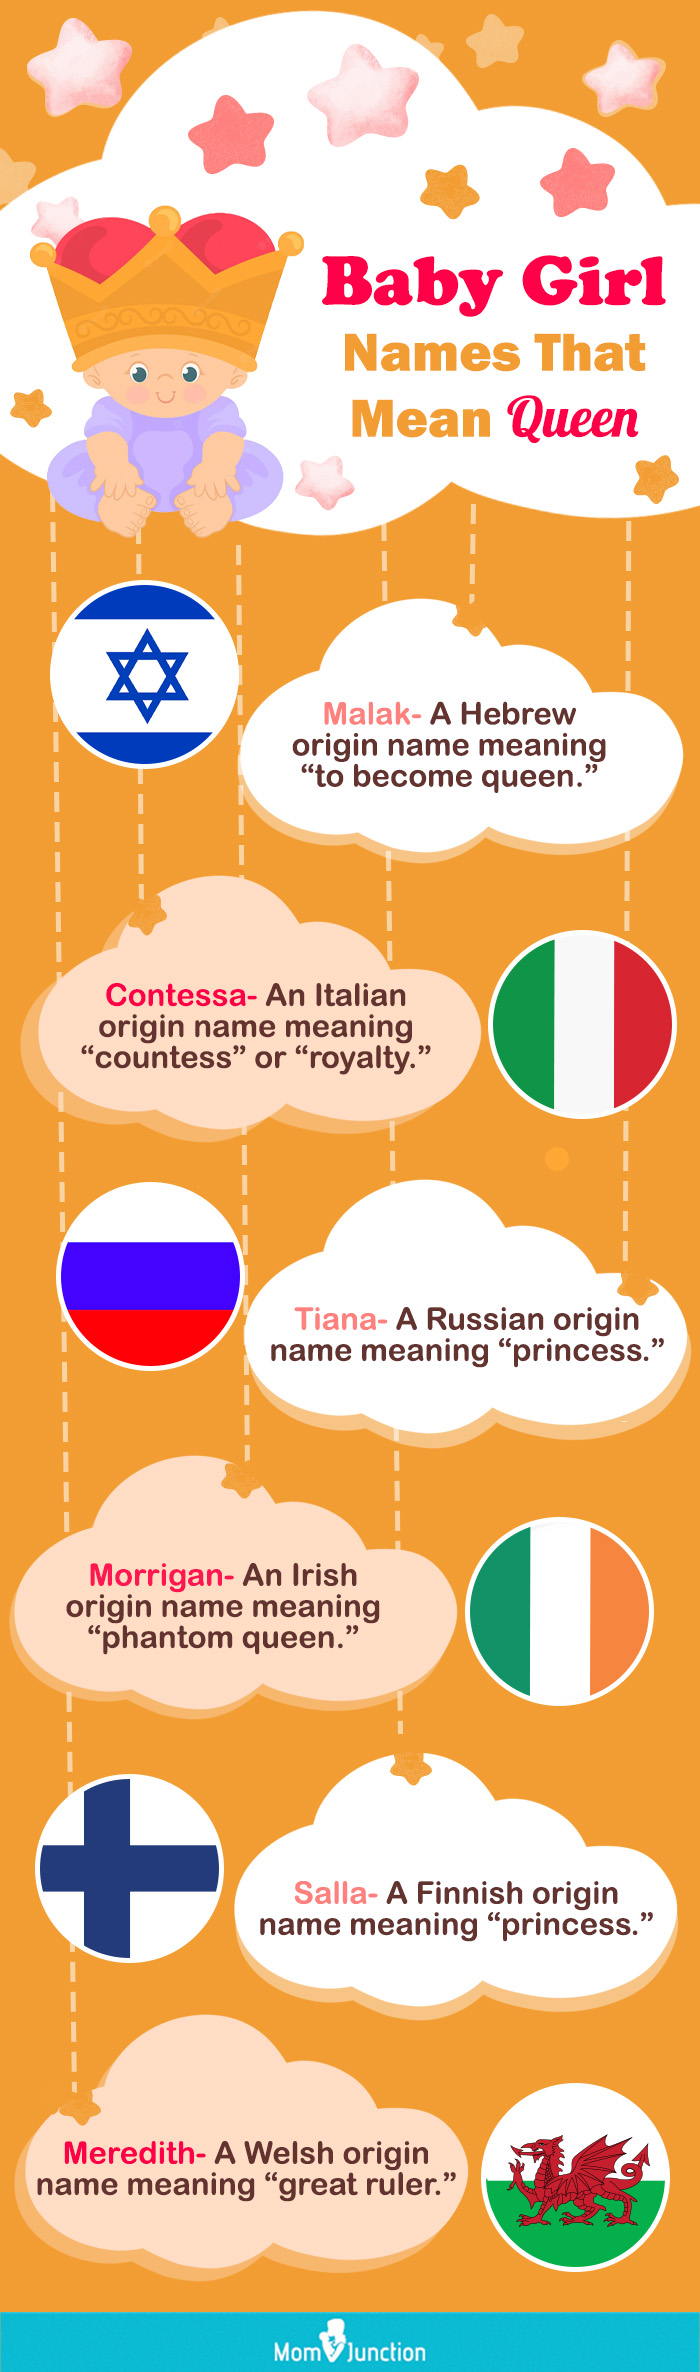 baby girl names that means queen (infographic)